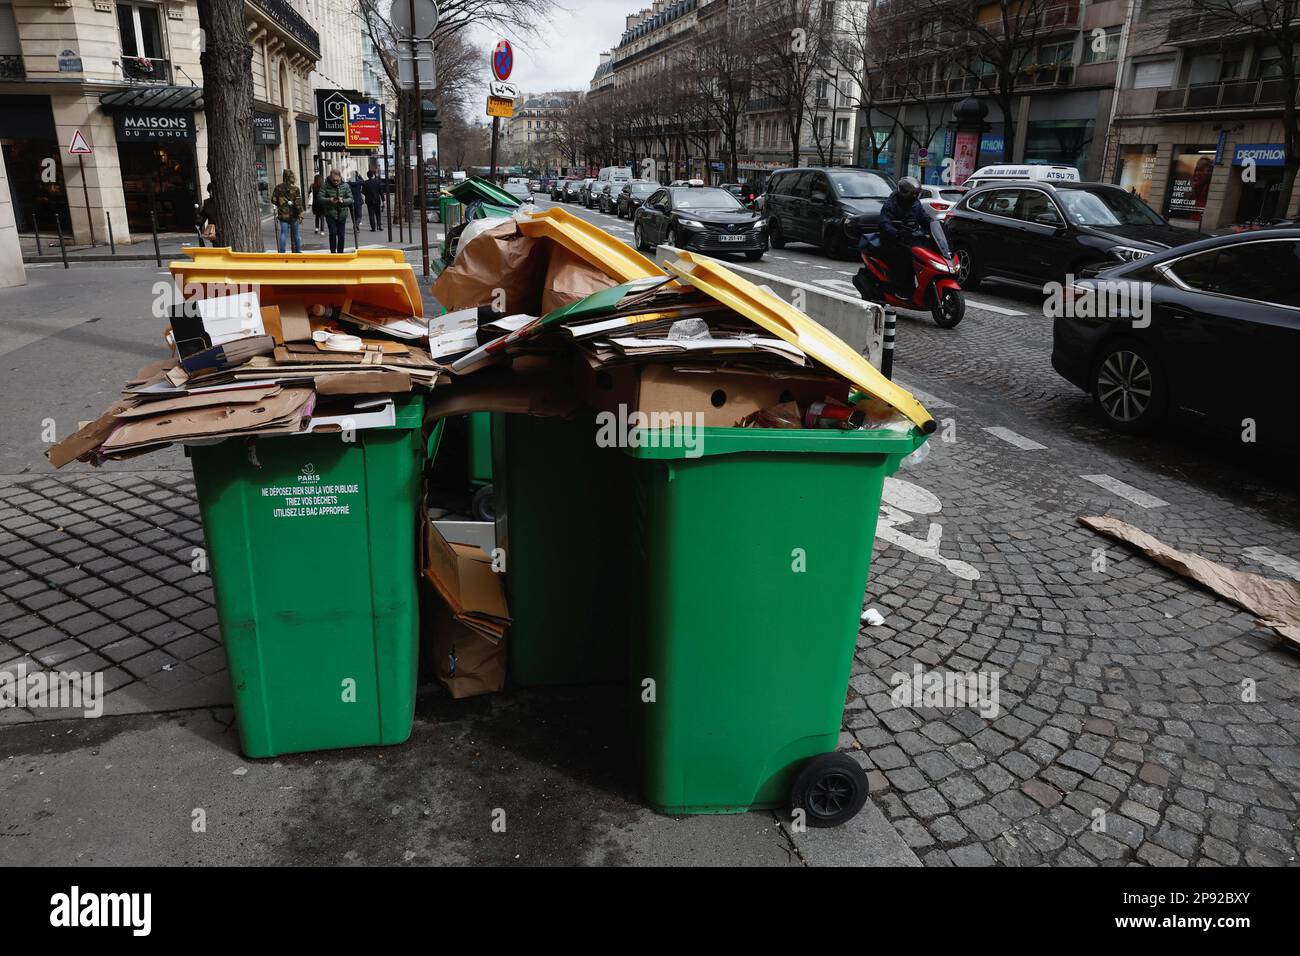 A view of a street where garbage cans are overflowing, as garbage has not been collected, in Paris, France March 10, 2023. REUTERS/Benoit Tessier Stock Photo